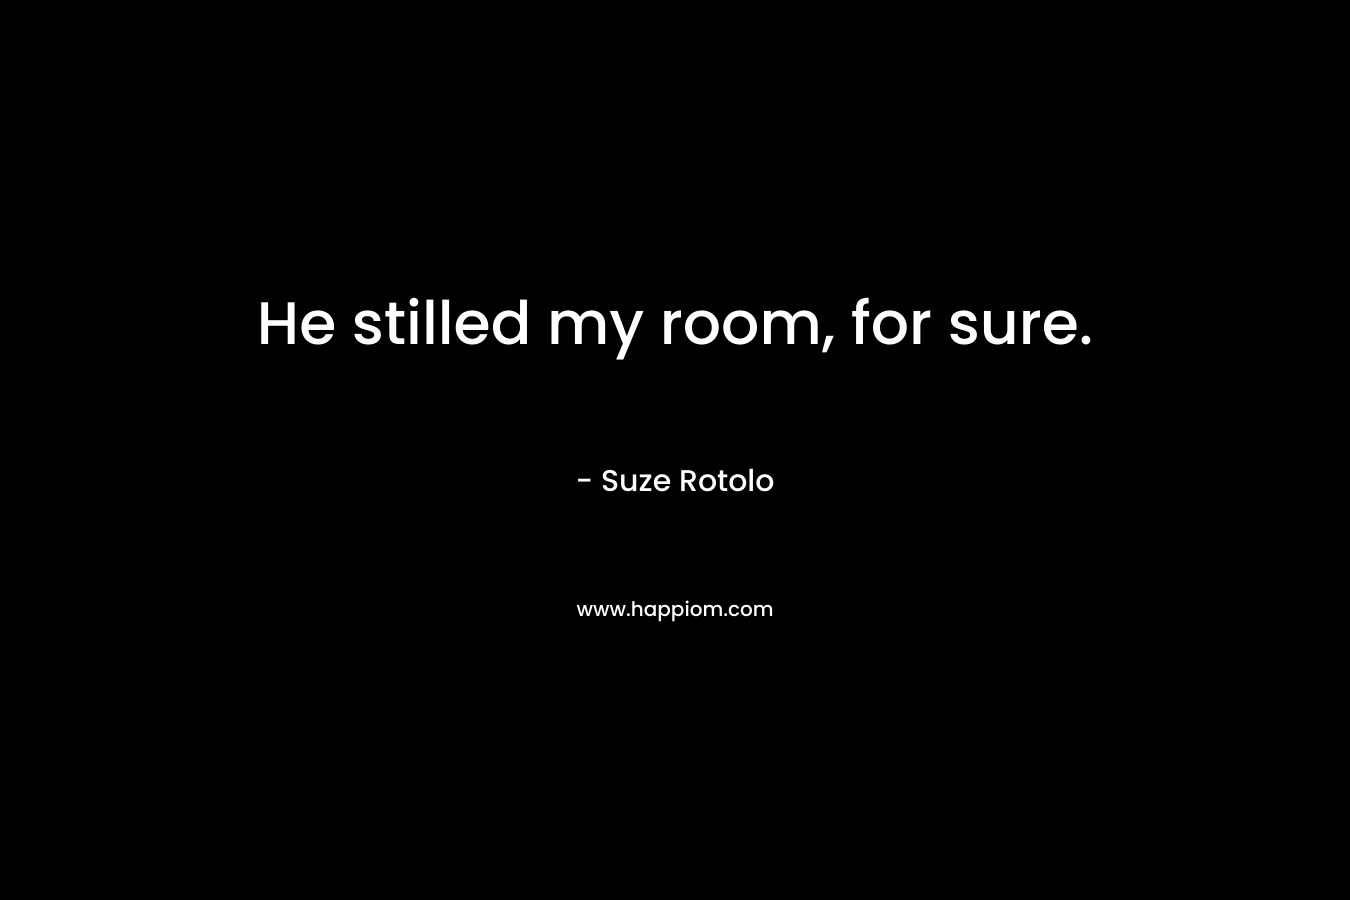 He stilled my room, for sure.